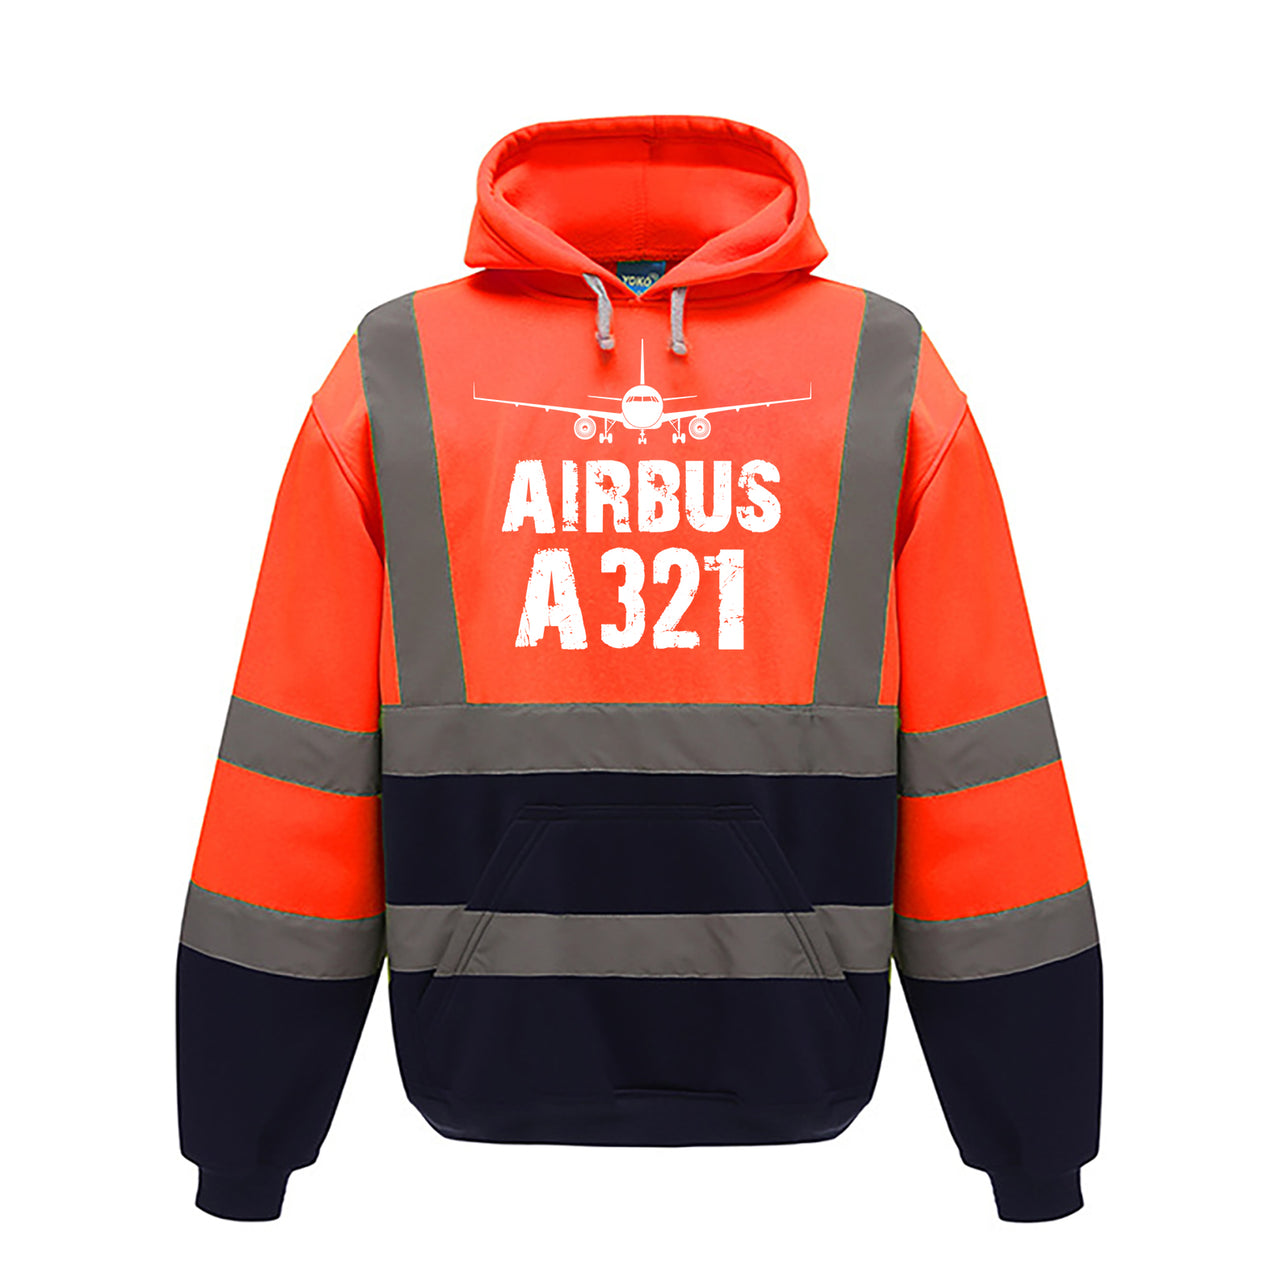 Airbus A321 & Plane Designed Reflective Hoodies